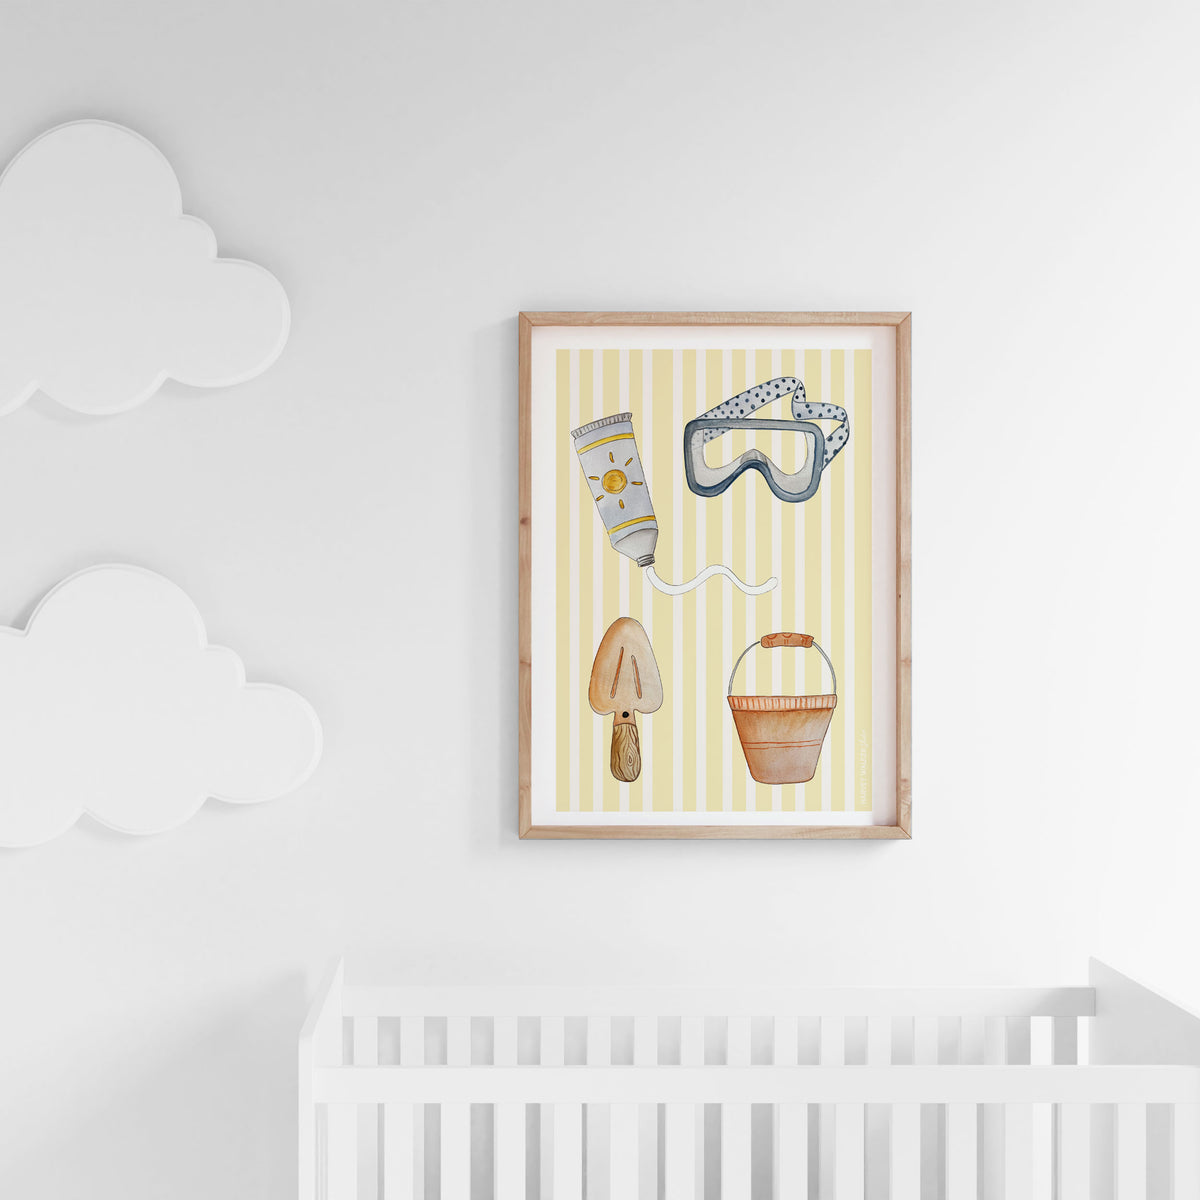 Find the perfect baby gift with this gender neutral and fun beach print. With a custom made oak frame, this beach print will look beautiful in a nursery just like this one with modern white cot and cloud lights.